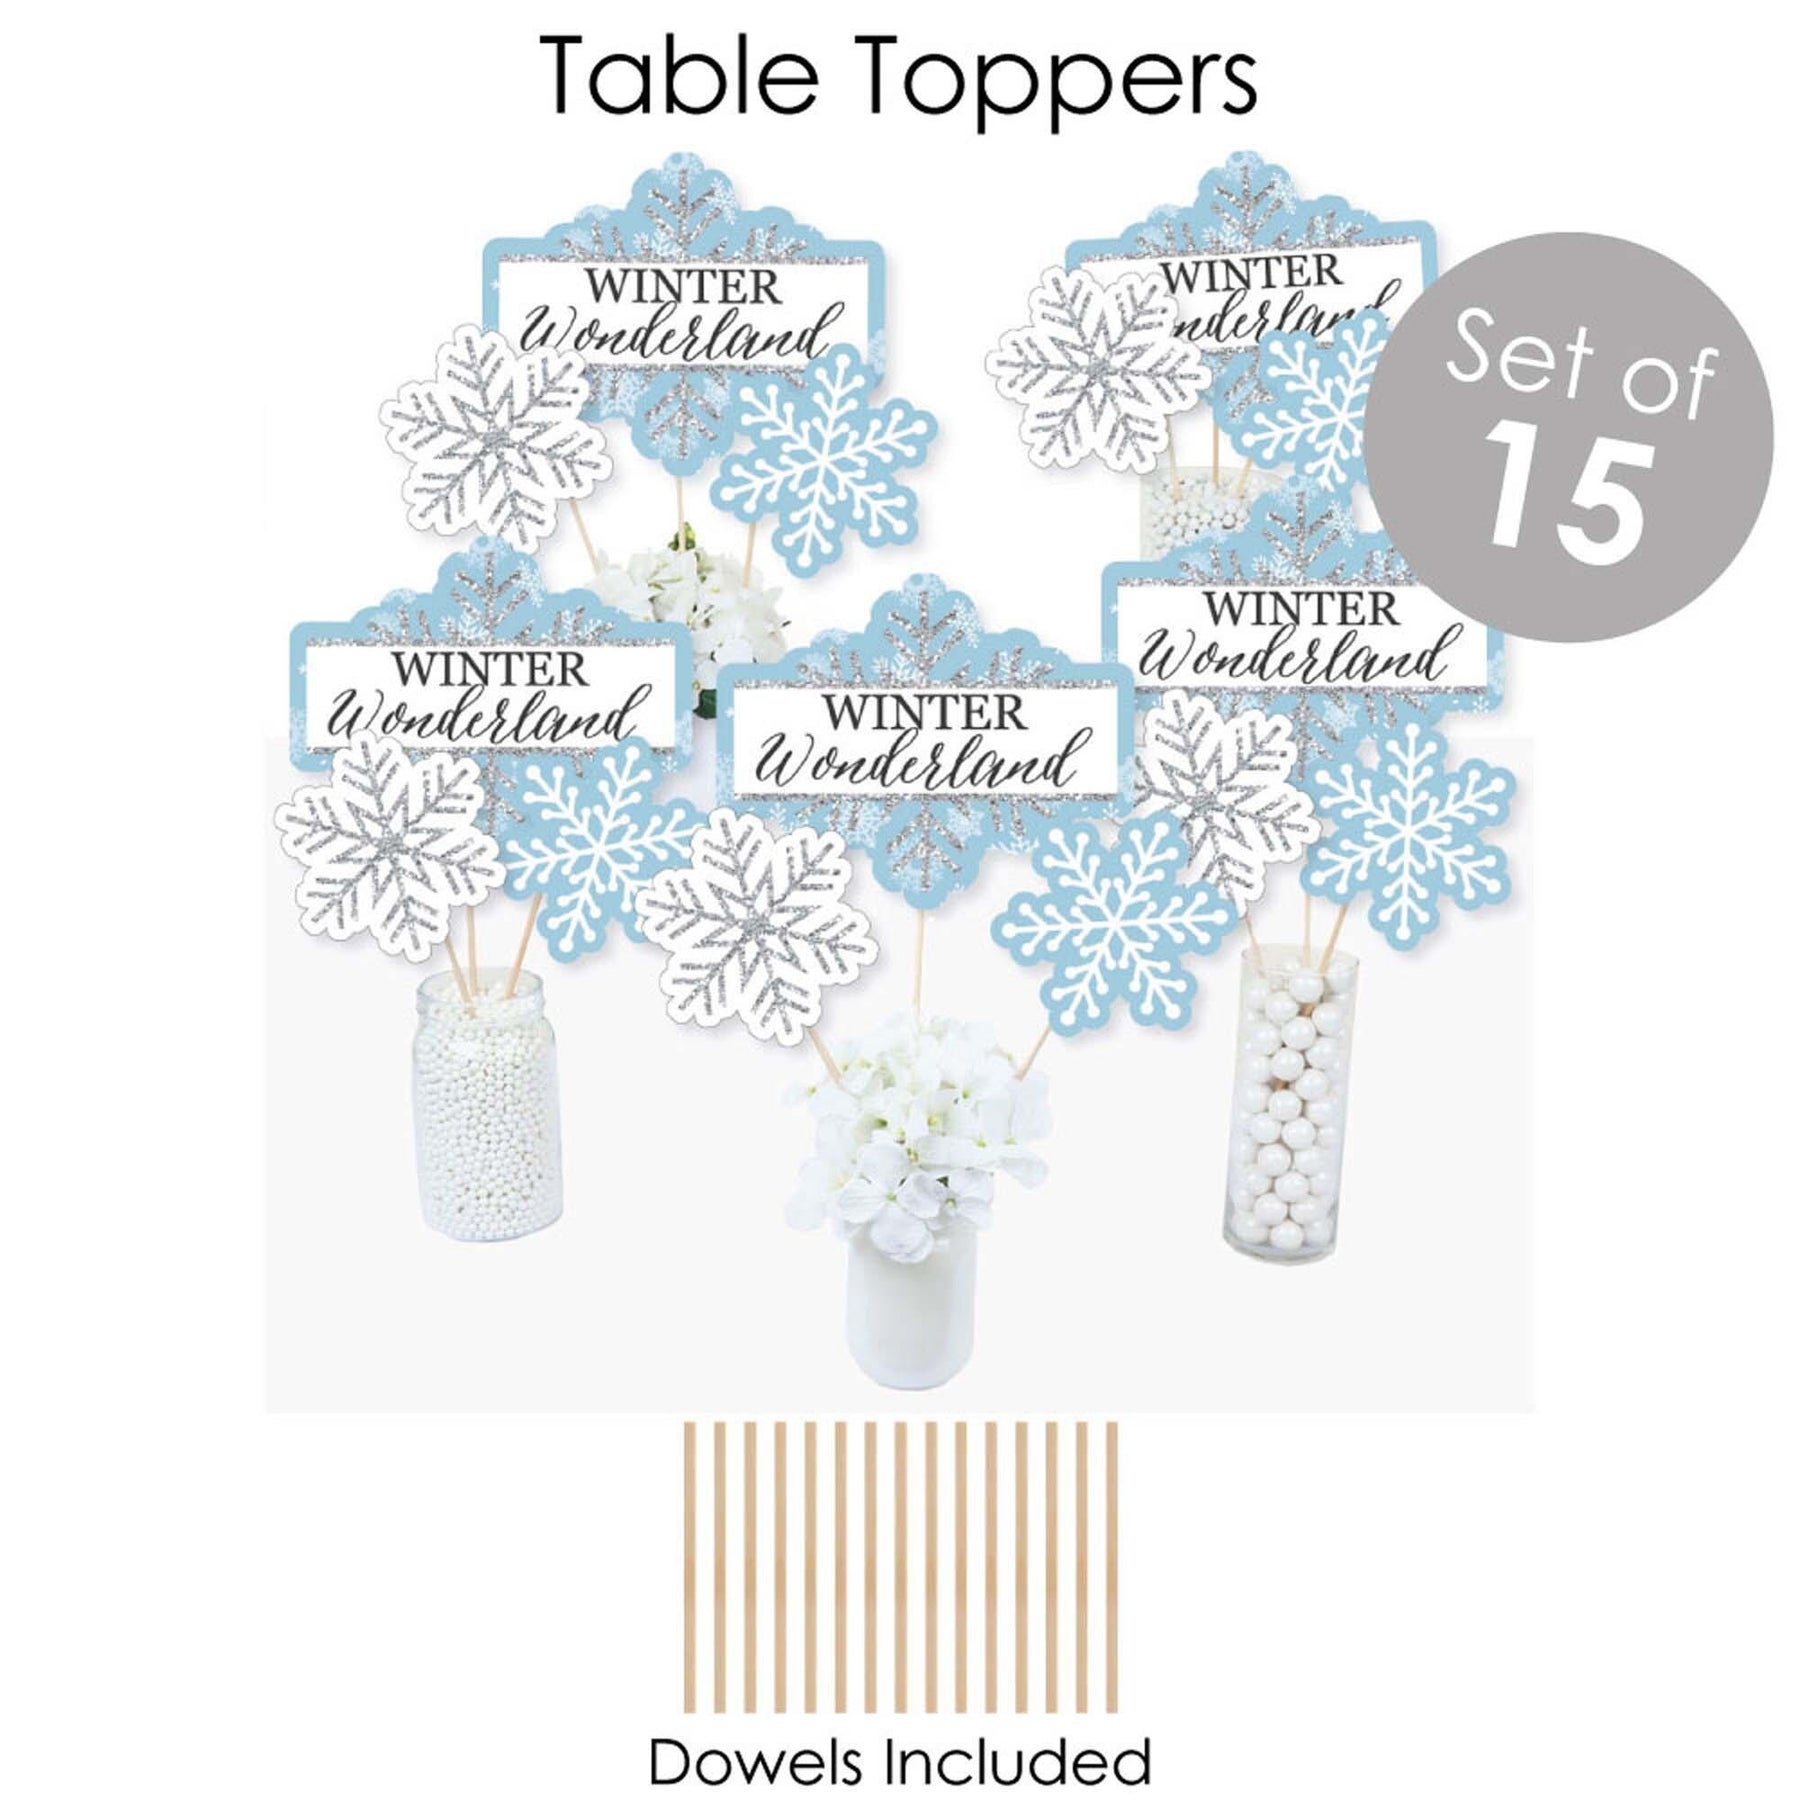 Bulk- Snowflake Confetti – Over The Top Cake Supplies - The Woodlands